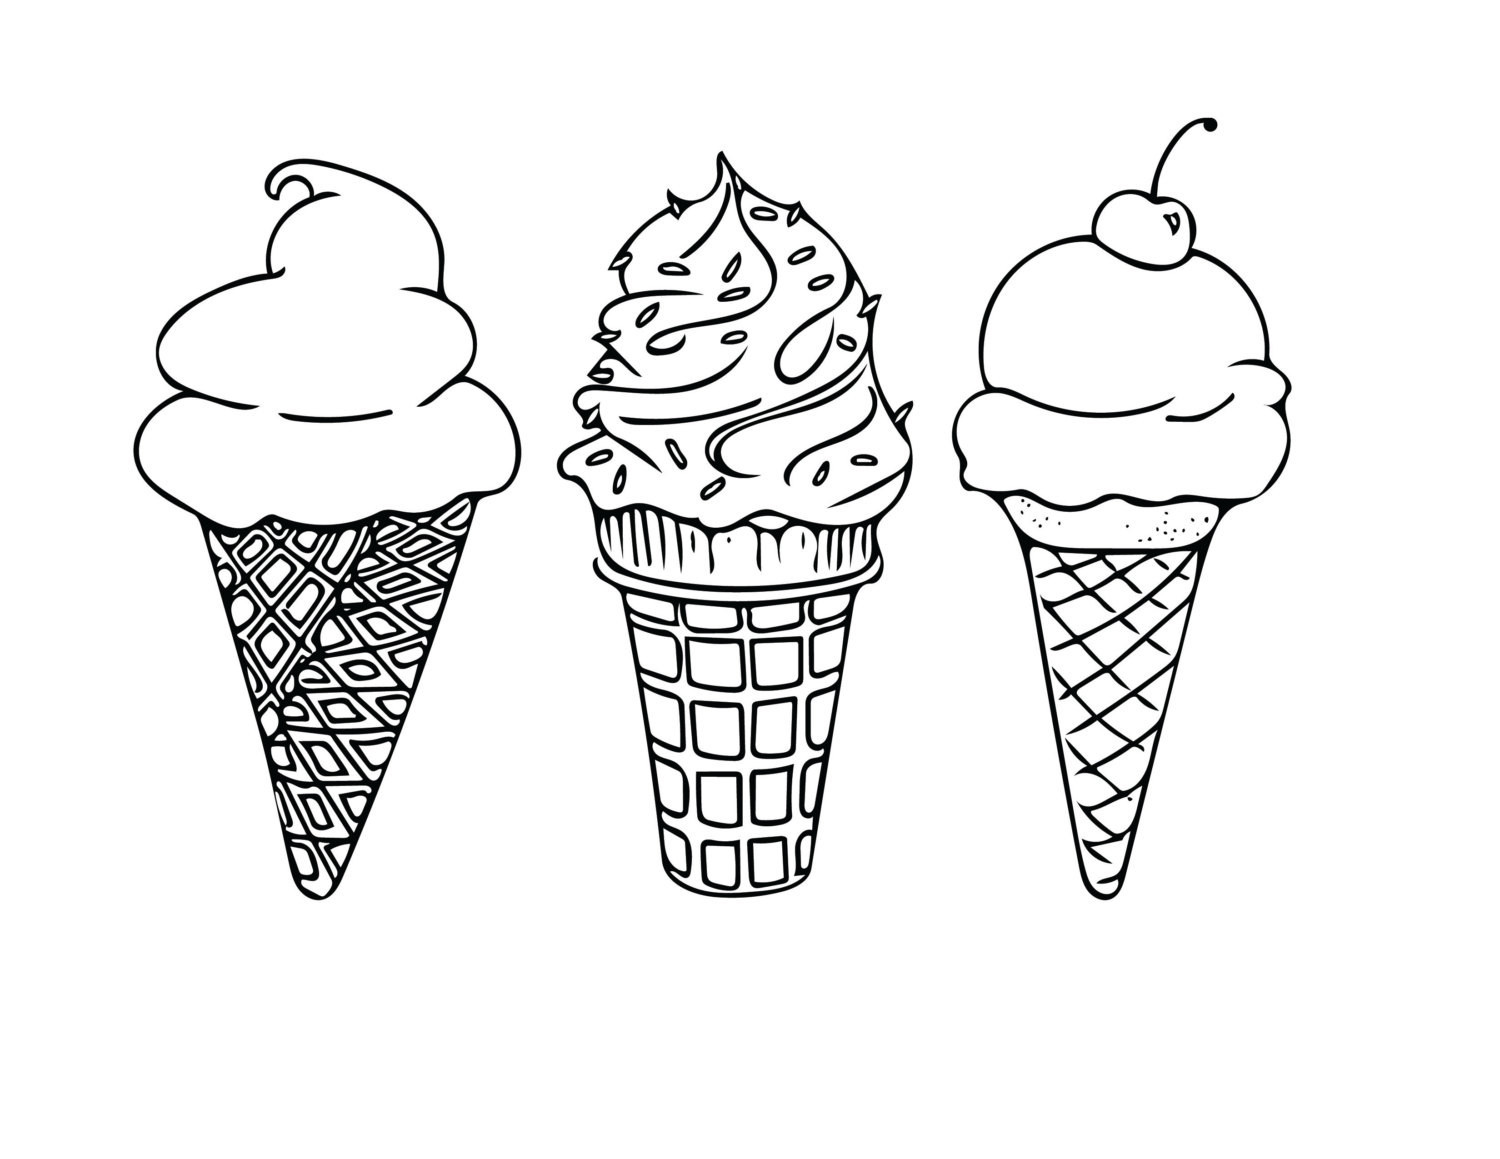 Coloring Pages Ice Cream
 Ice Cream Coloring Pages thekindproject